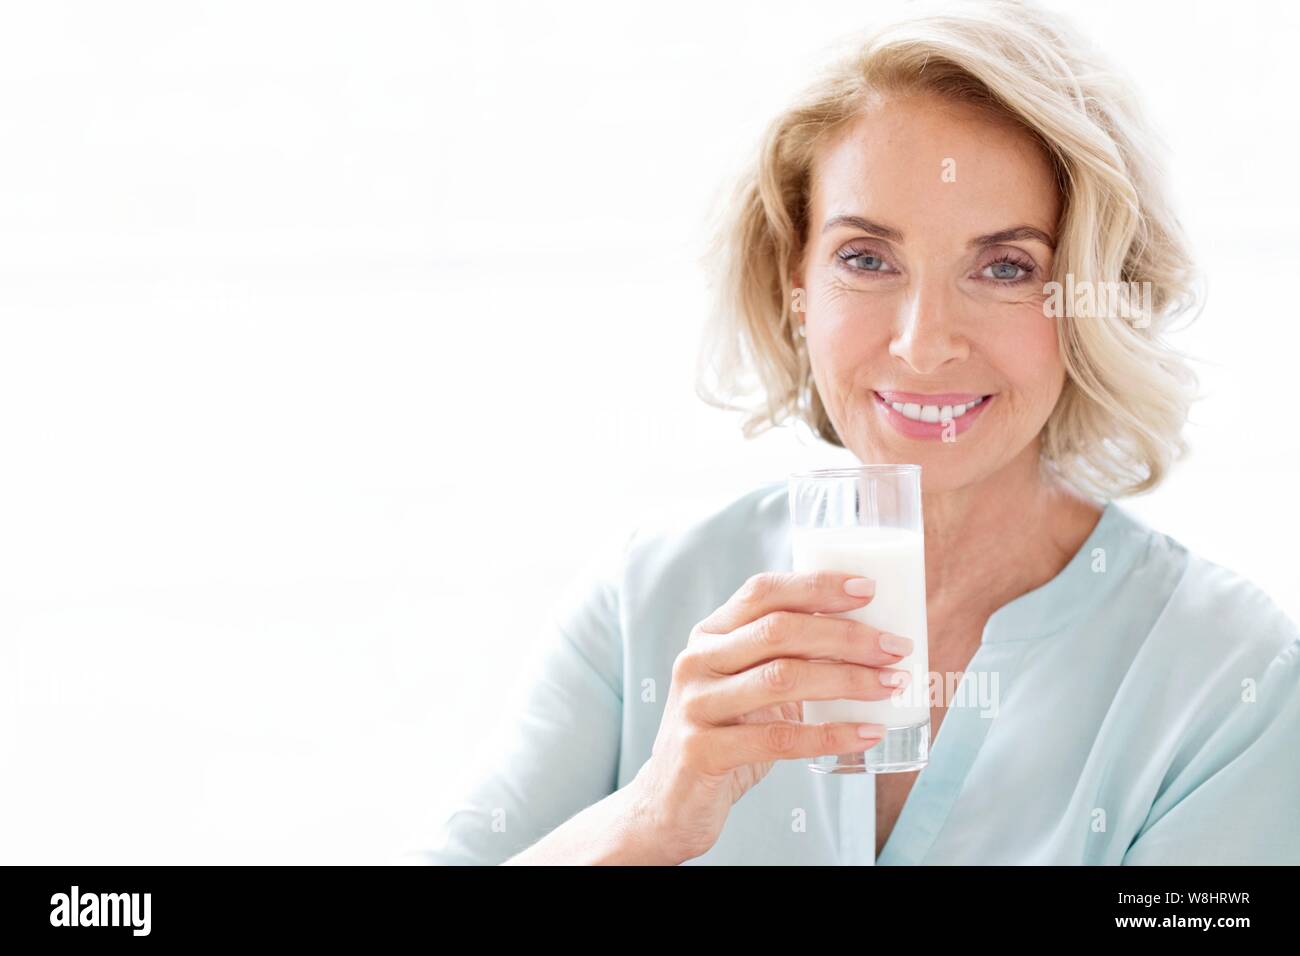 Mature woman smiling with glass of milk. Stock Photo